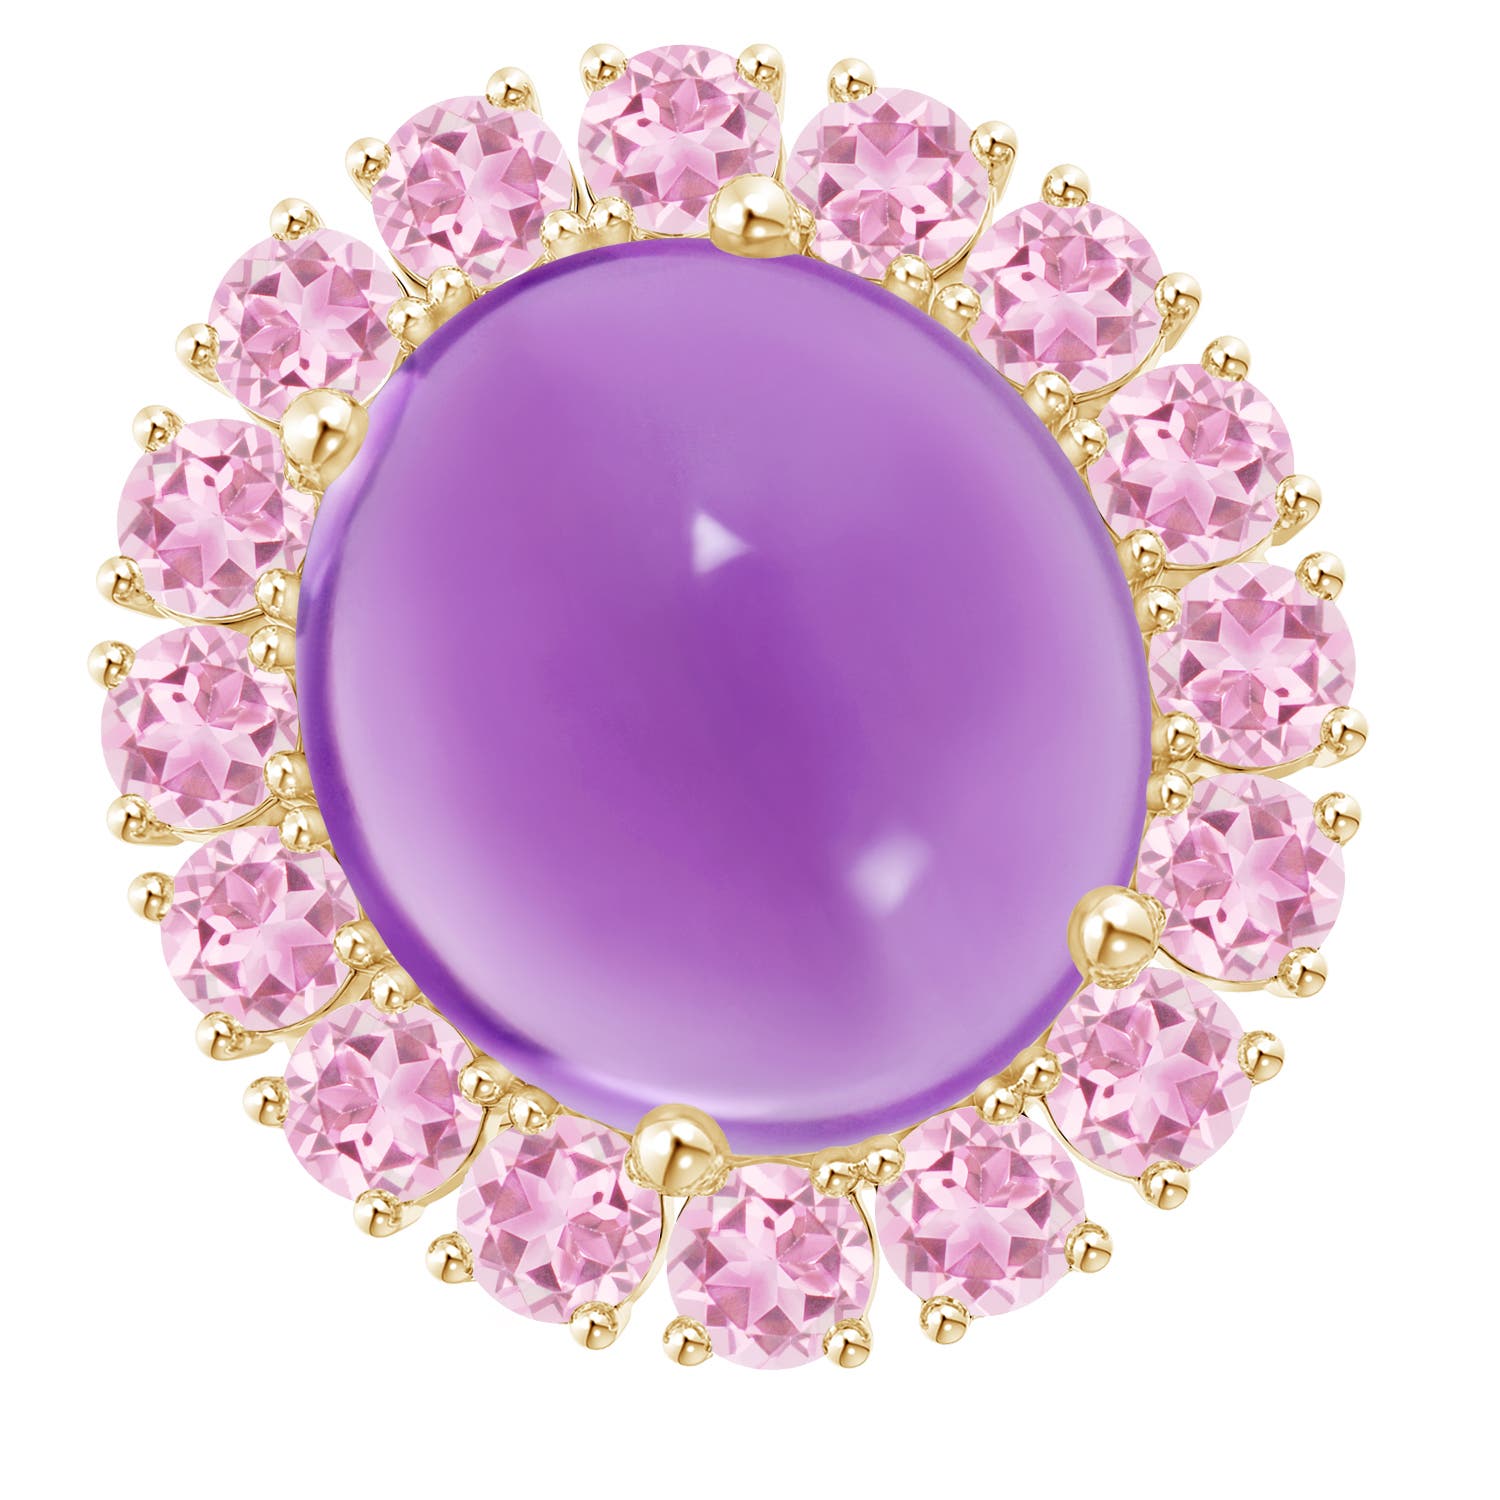 A - Amethyst / 13.56 CT / 14 KT Yellow Gold